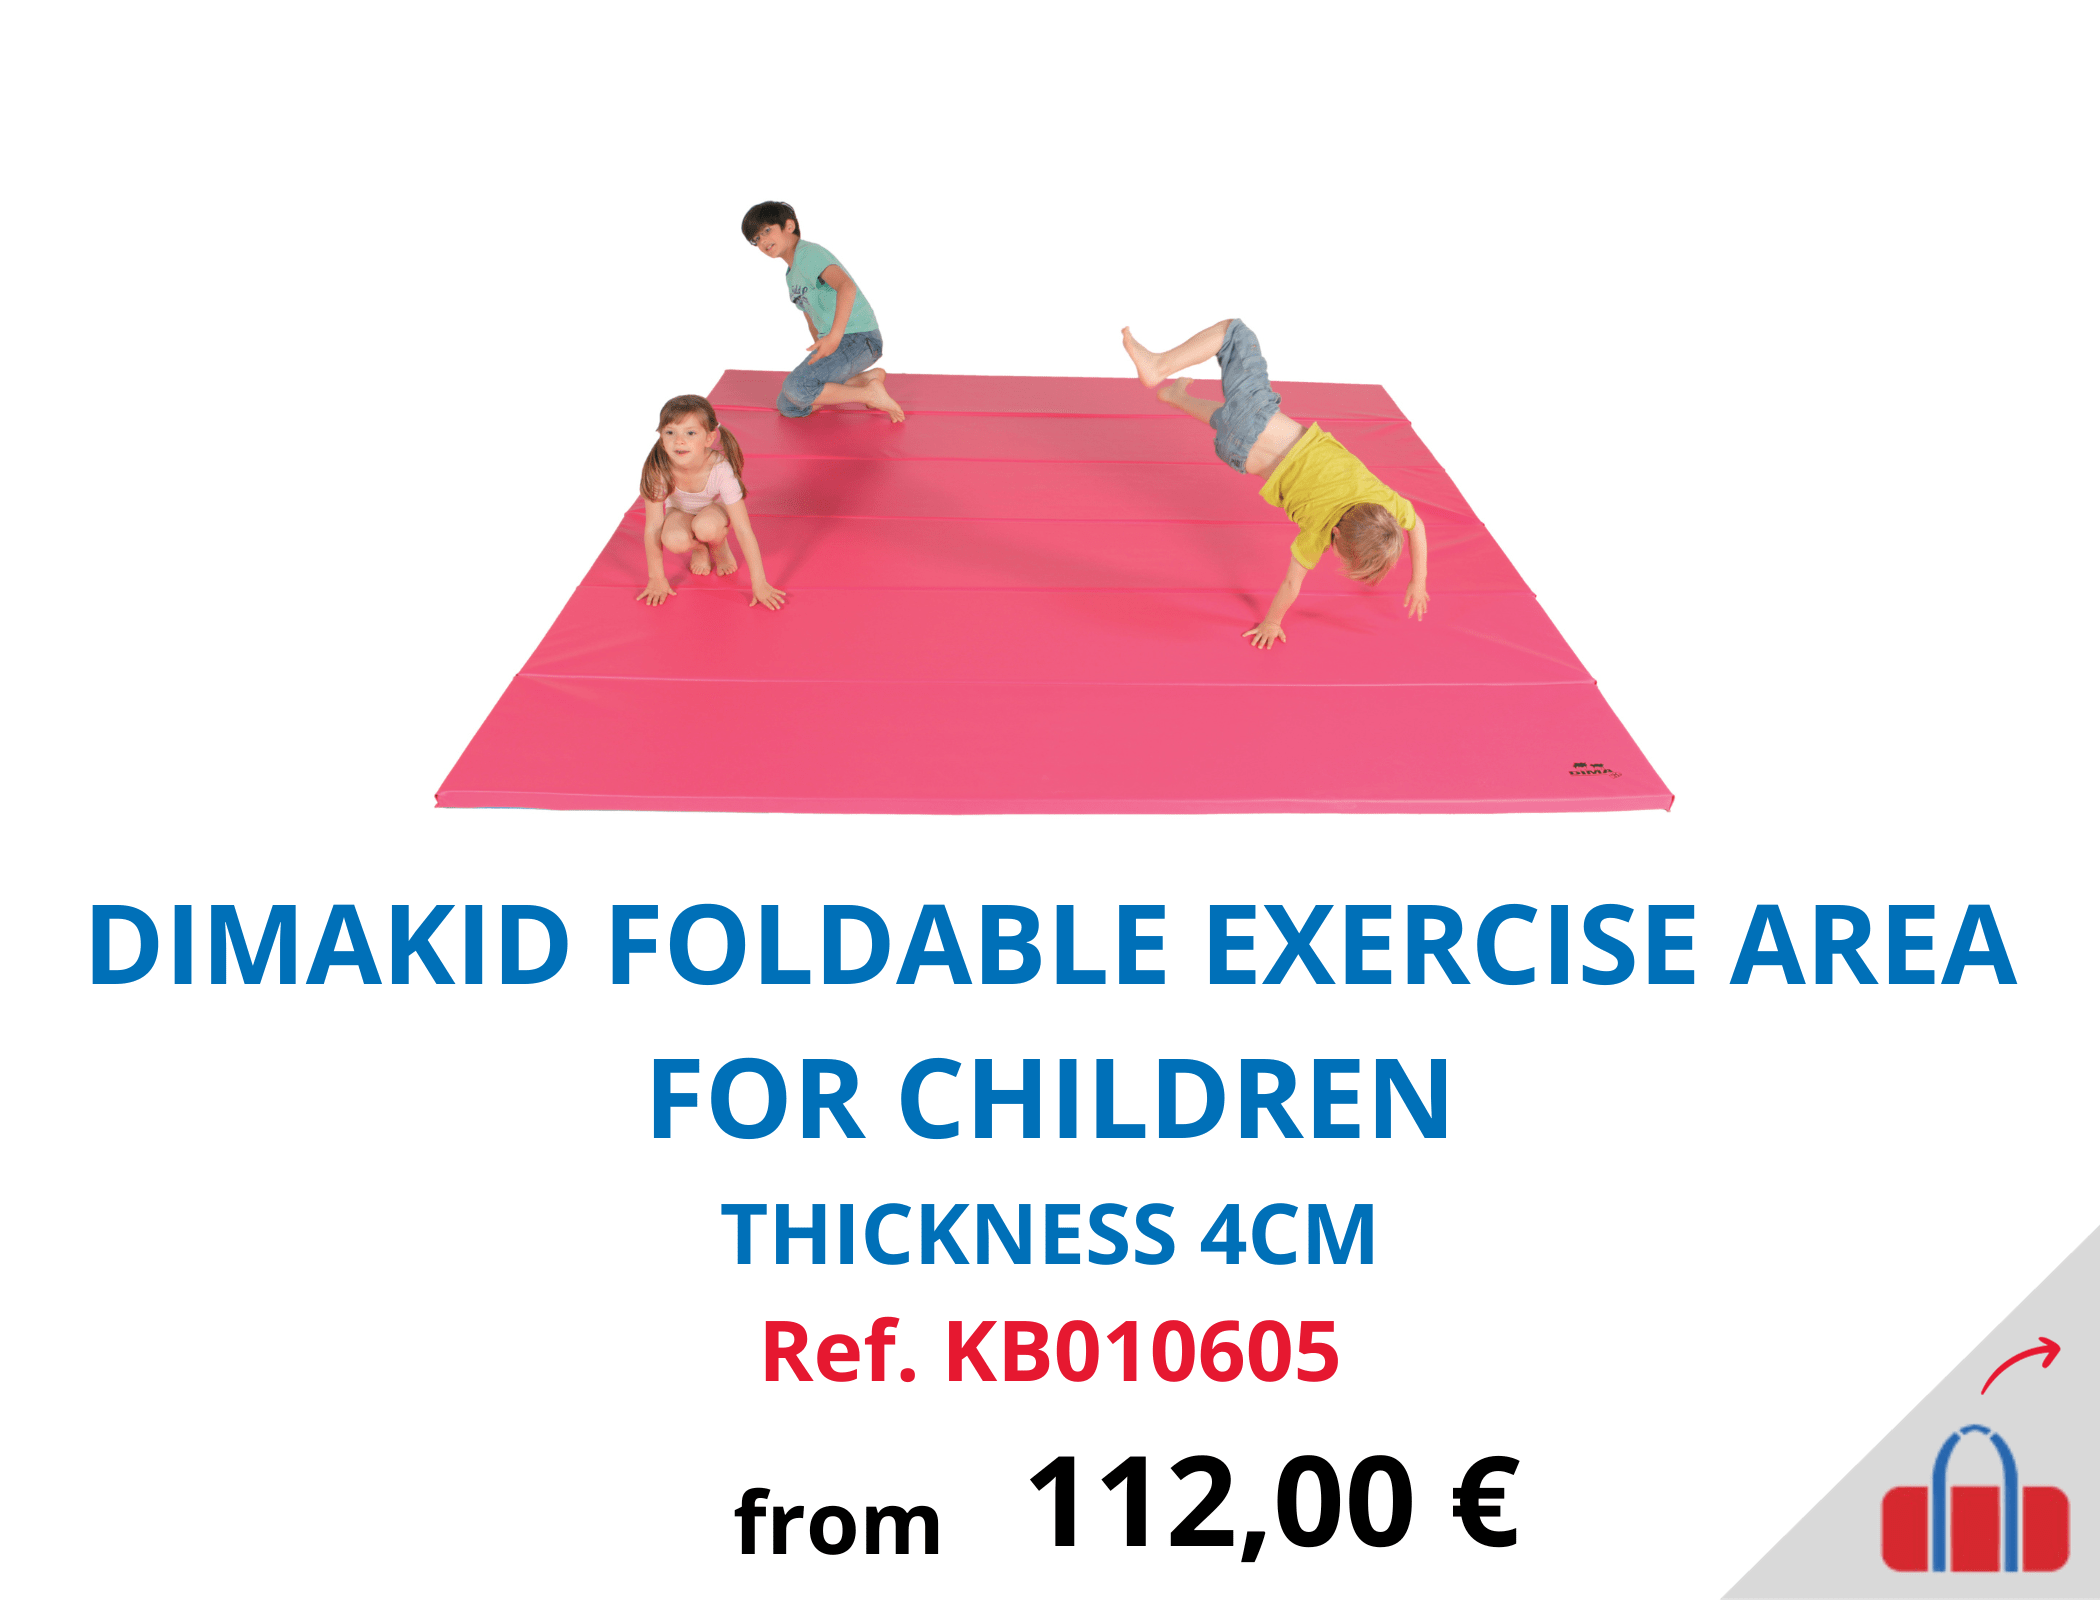 Dimakid foldable exercice area